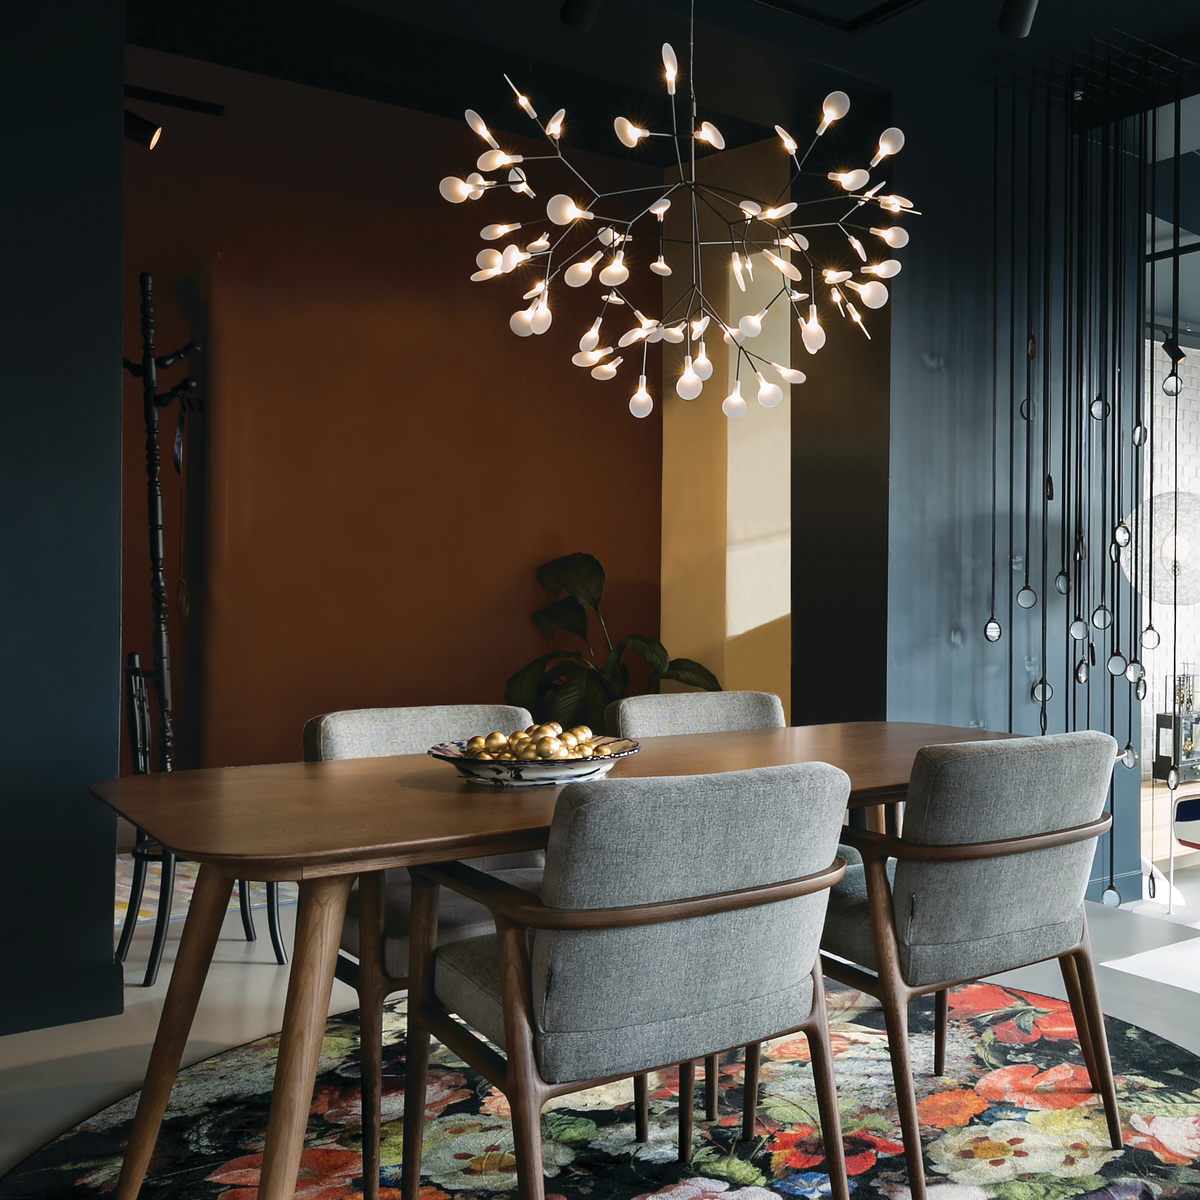 Heracleum II LED Chandelier in a dining room.